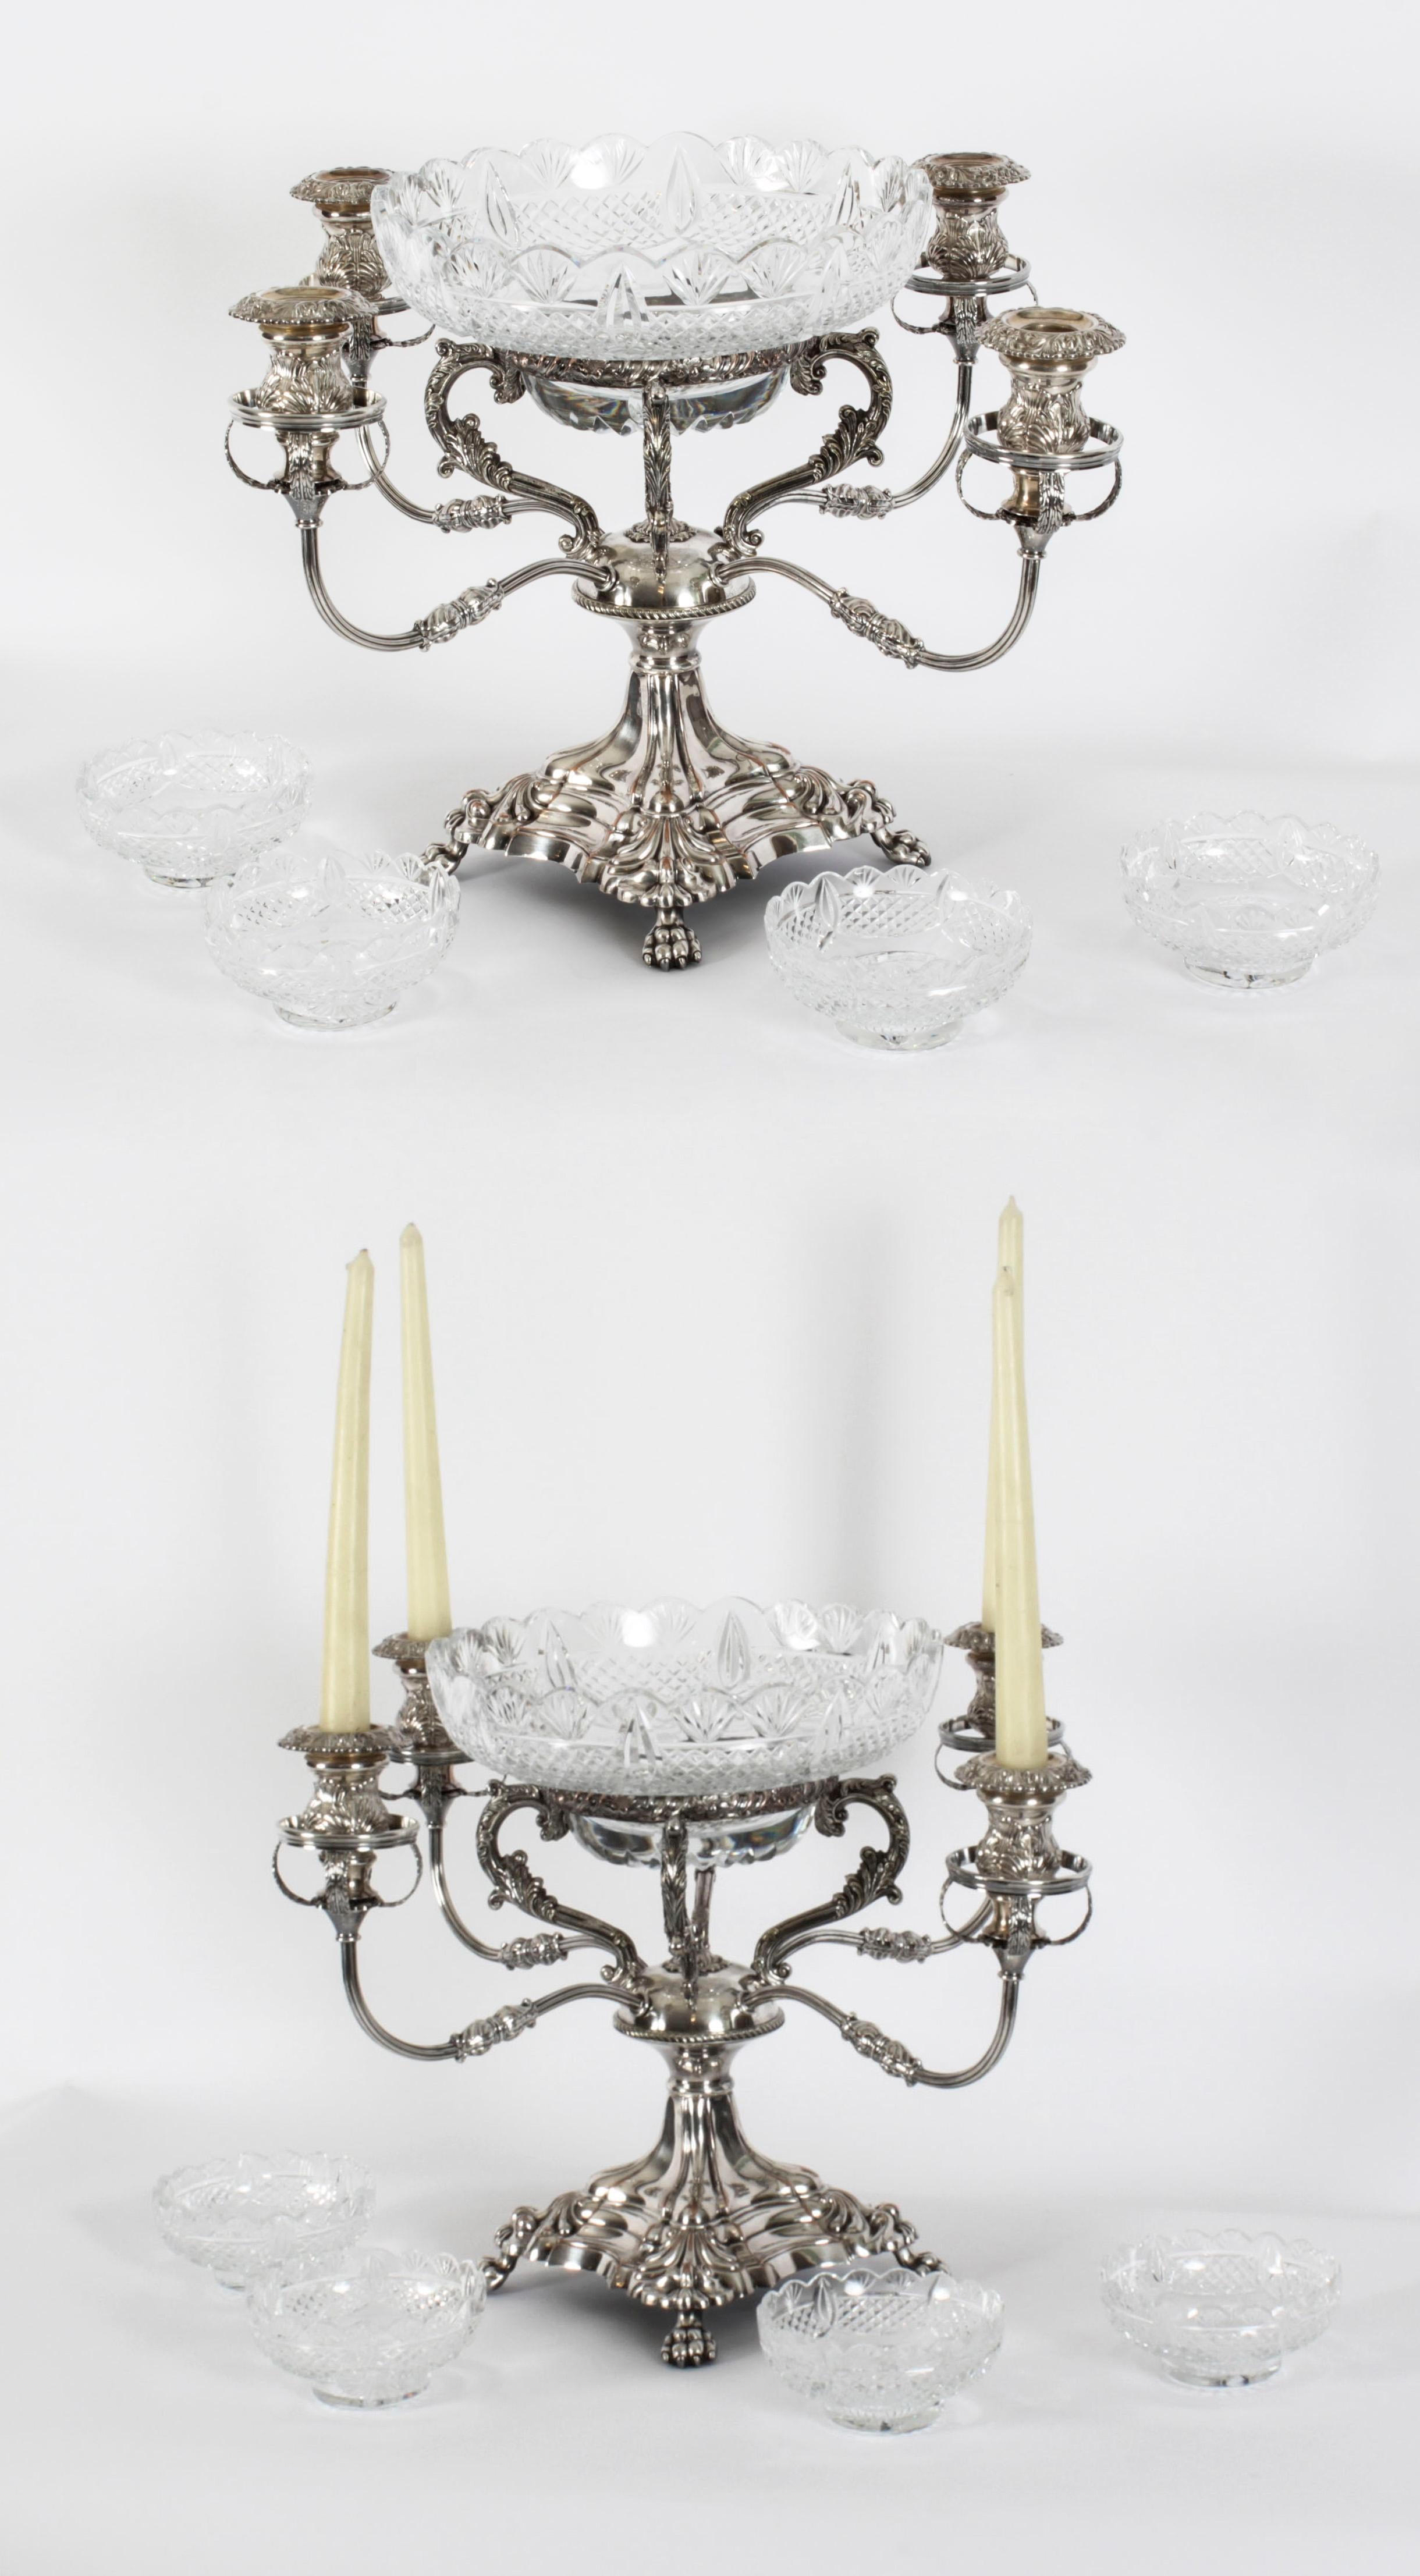 Antique English Silver Plate Cut Glass Epergne Candelabra Centrepiece 19th C 12